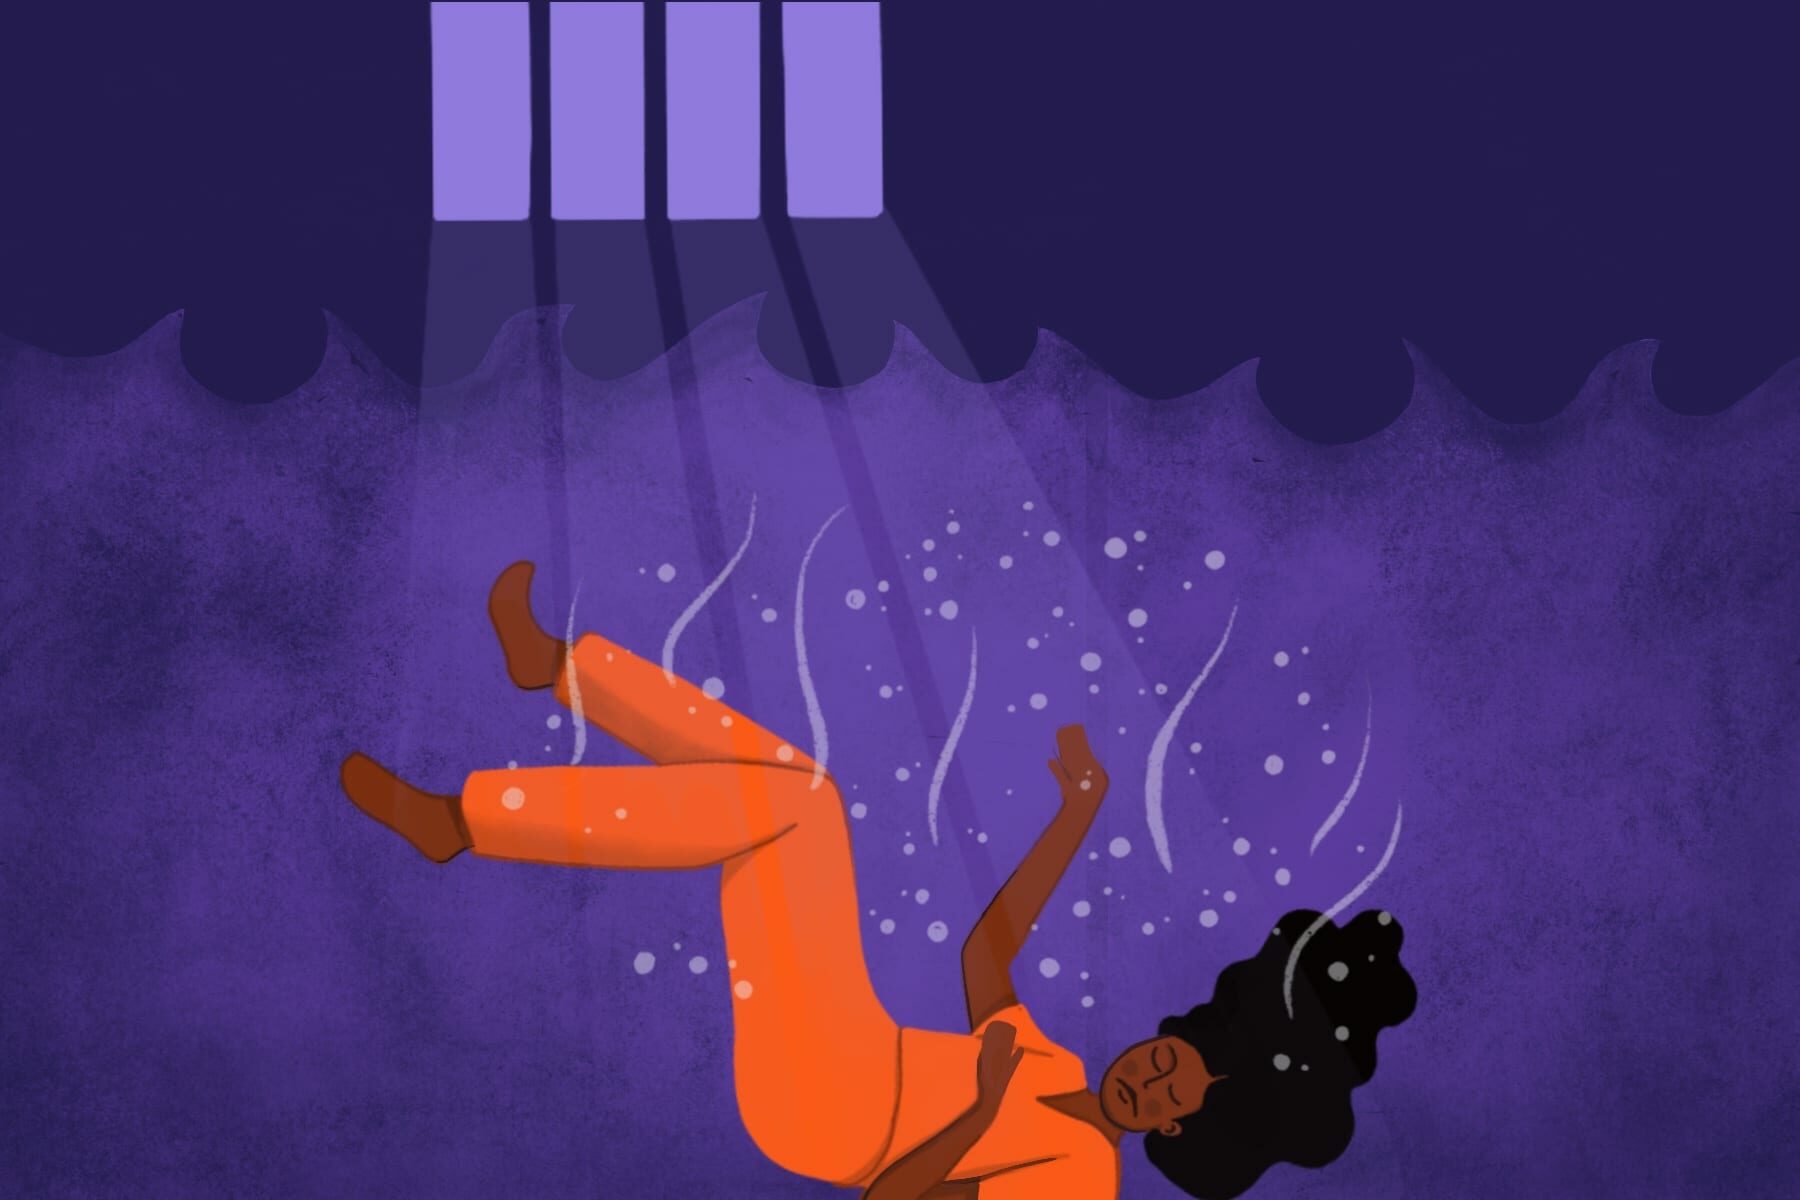 An image of a imprisoned woman sinking in water in her jail cell.